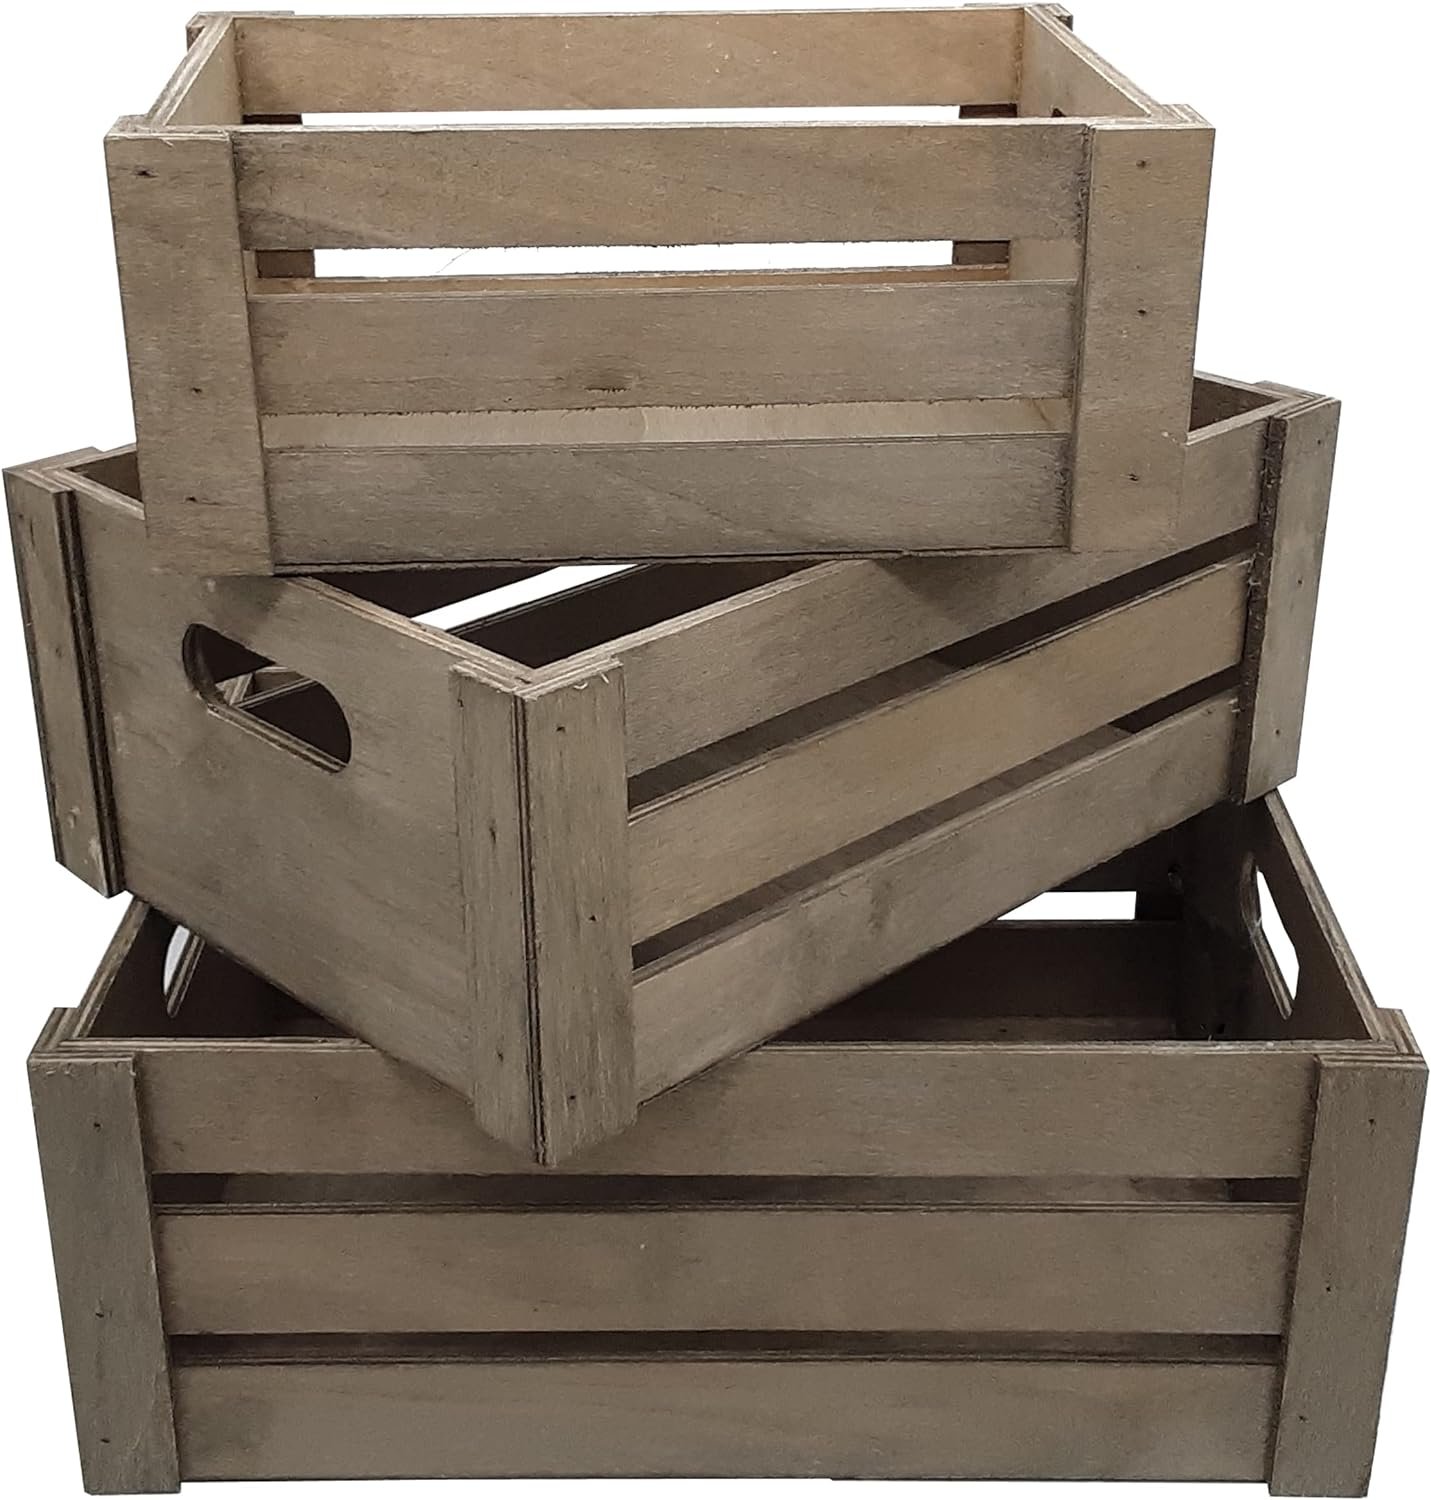 Wooden Crates Storage Container Review